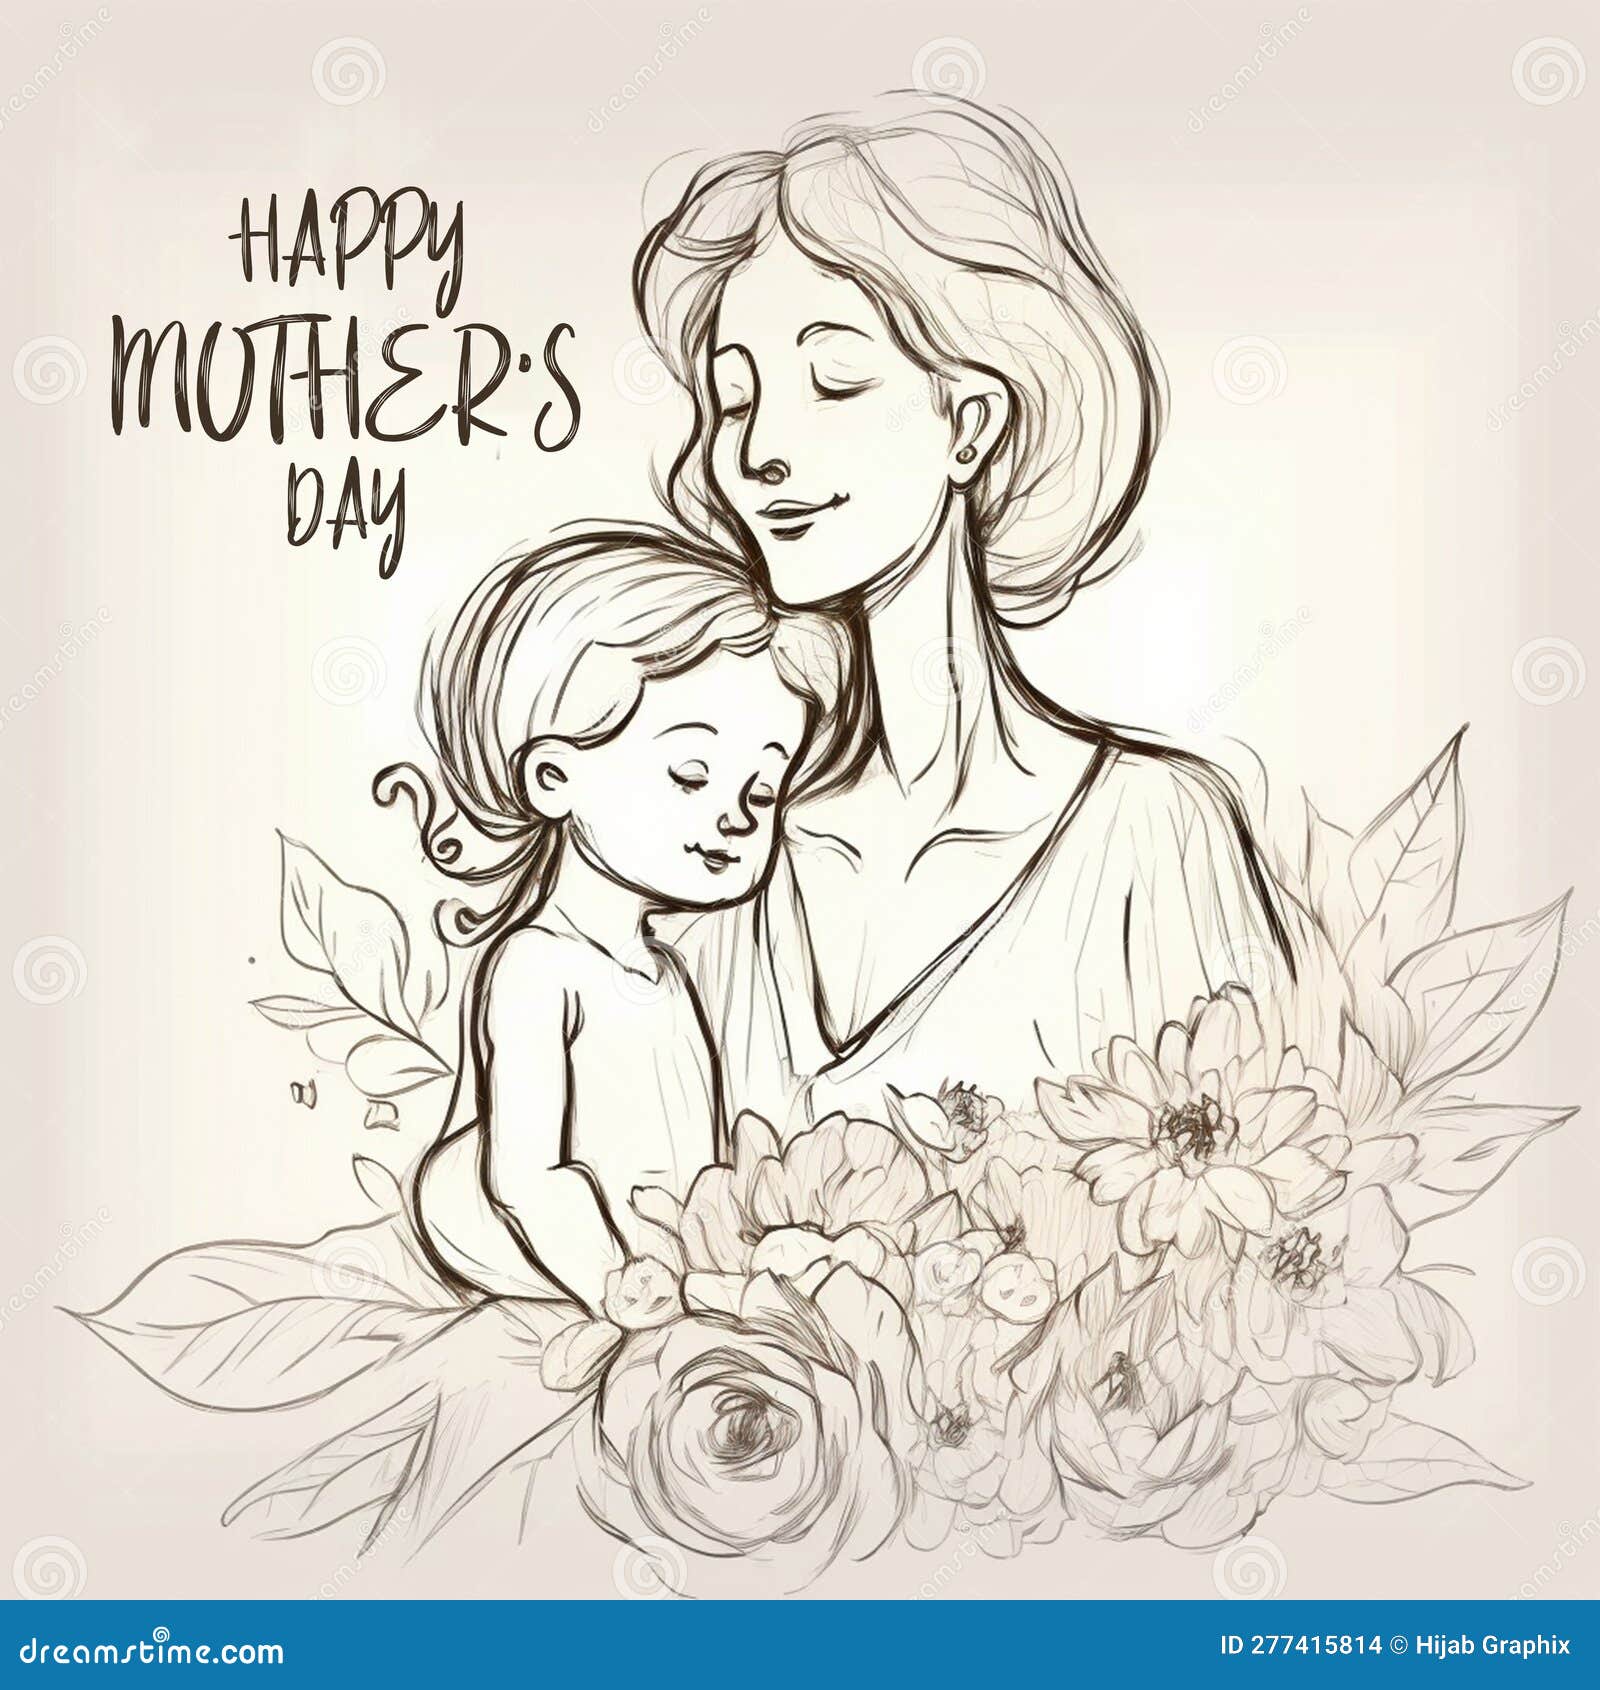 Happy Mother's Day Card, Drawing Of A Girl With A Balloon Stock Photo,  Picture and Royalty Free Image. Image 130591109.